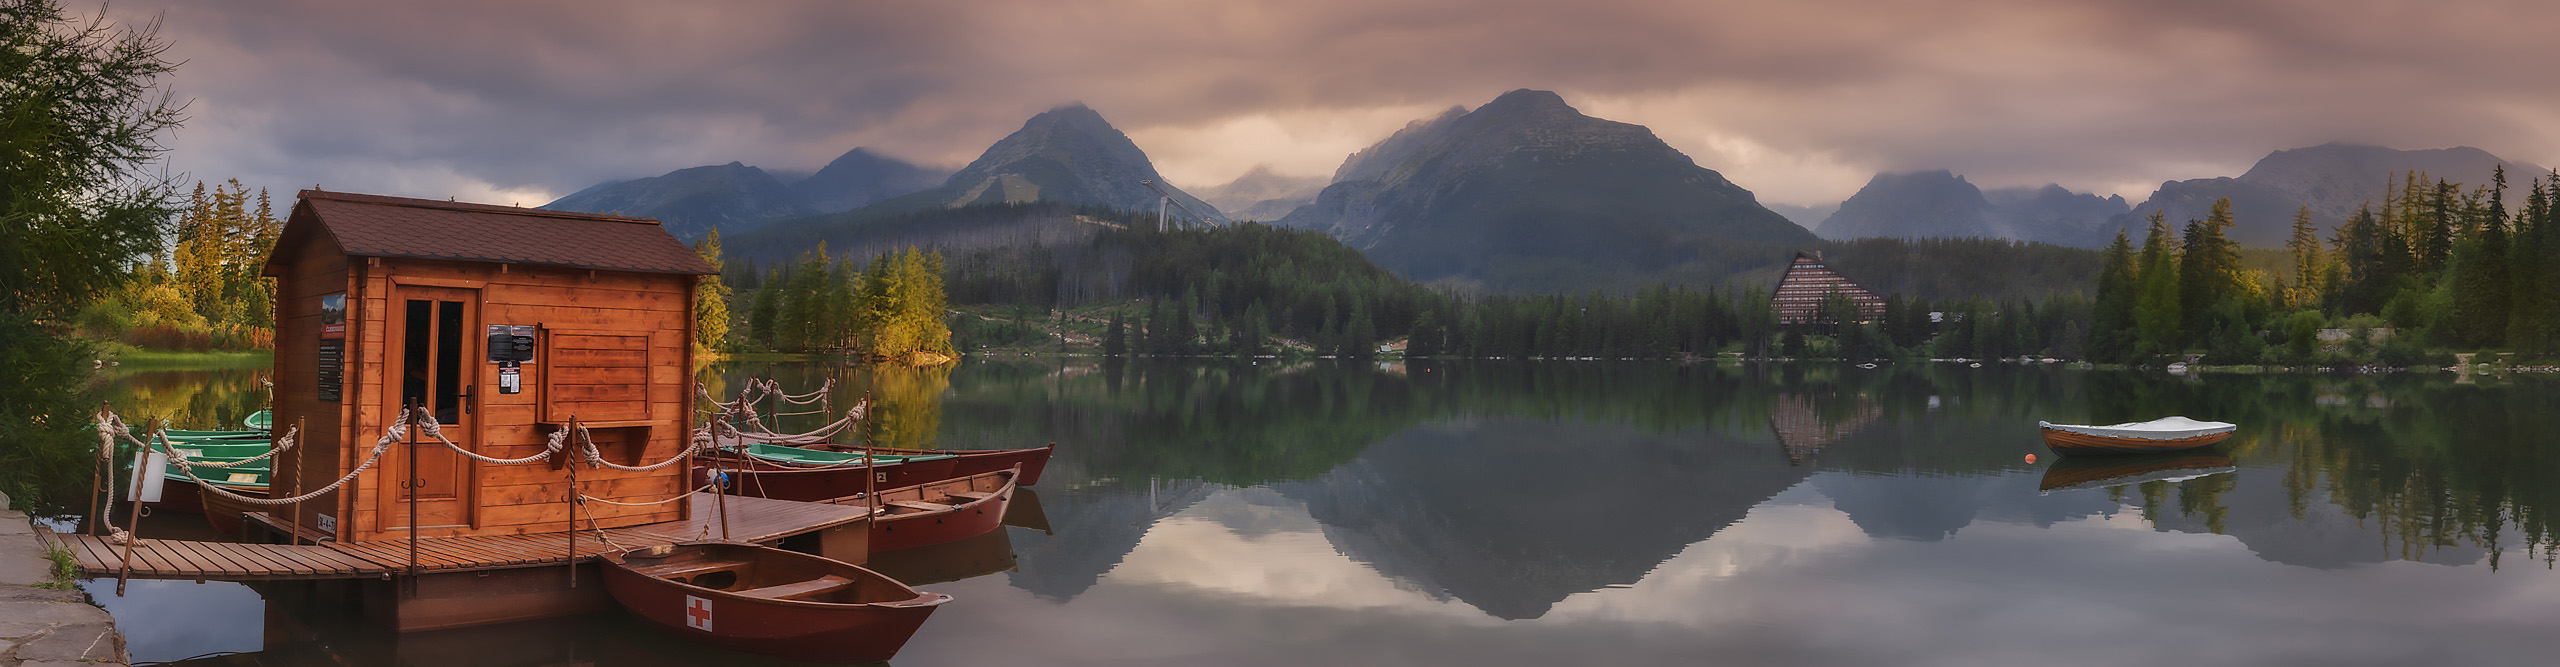 Boat hut and clouds reflected on the waters of the Strbske Pleso in the Tatras Mountains, Slovakia 